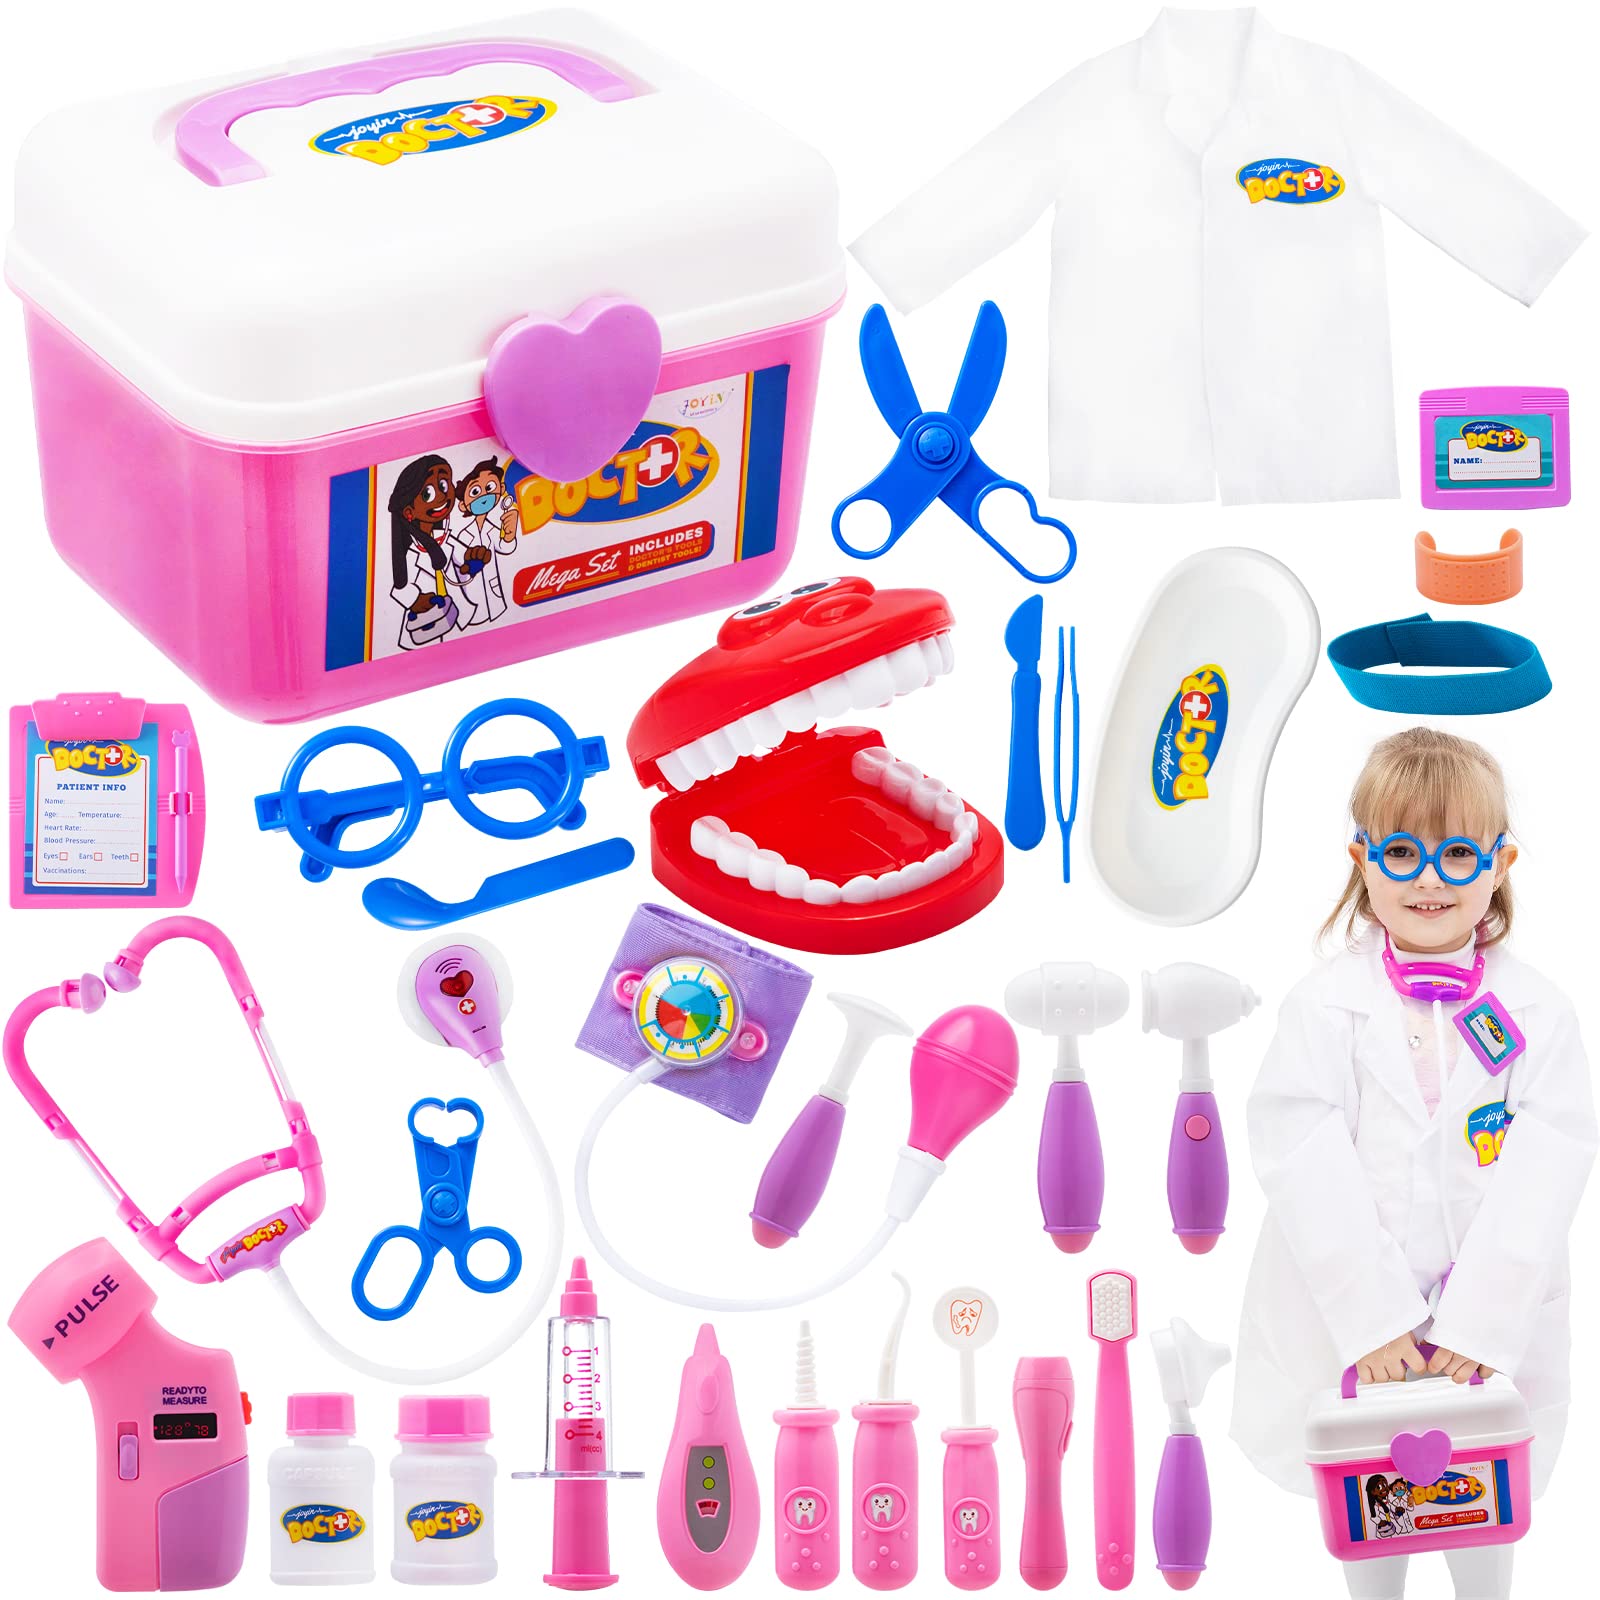 JOYIN 31Pcs Doctor Kit for Kids, Pretend Play Toys,Educational Dentist Medical Kit with Electronic Stethoscope, Doctor Role Play Halloween Costume,PINK